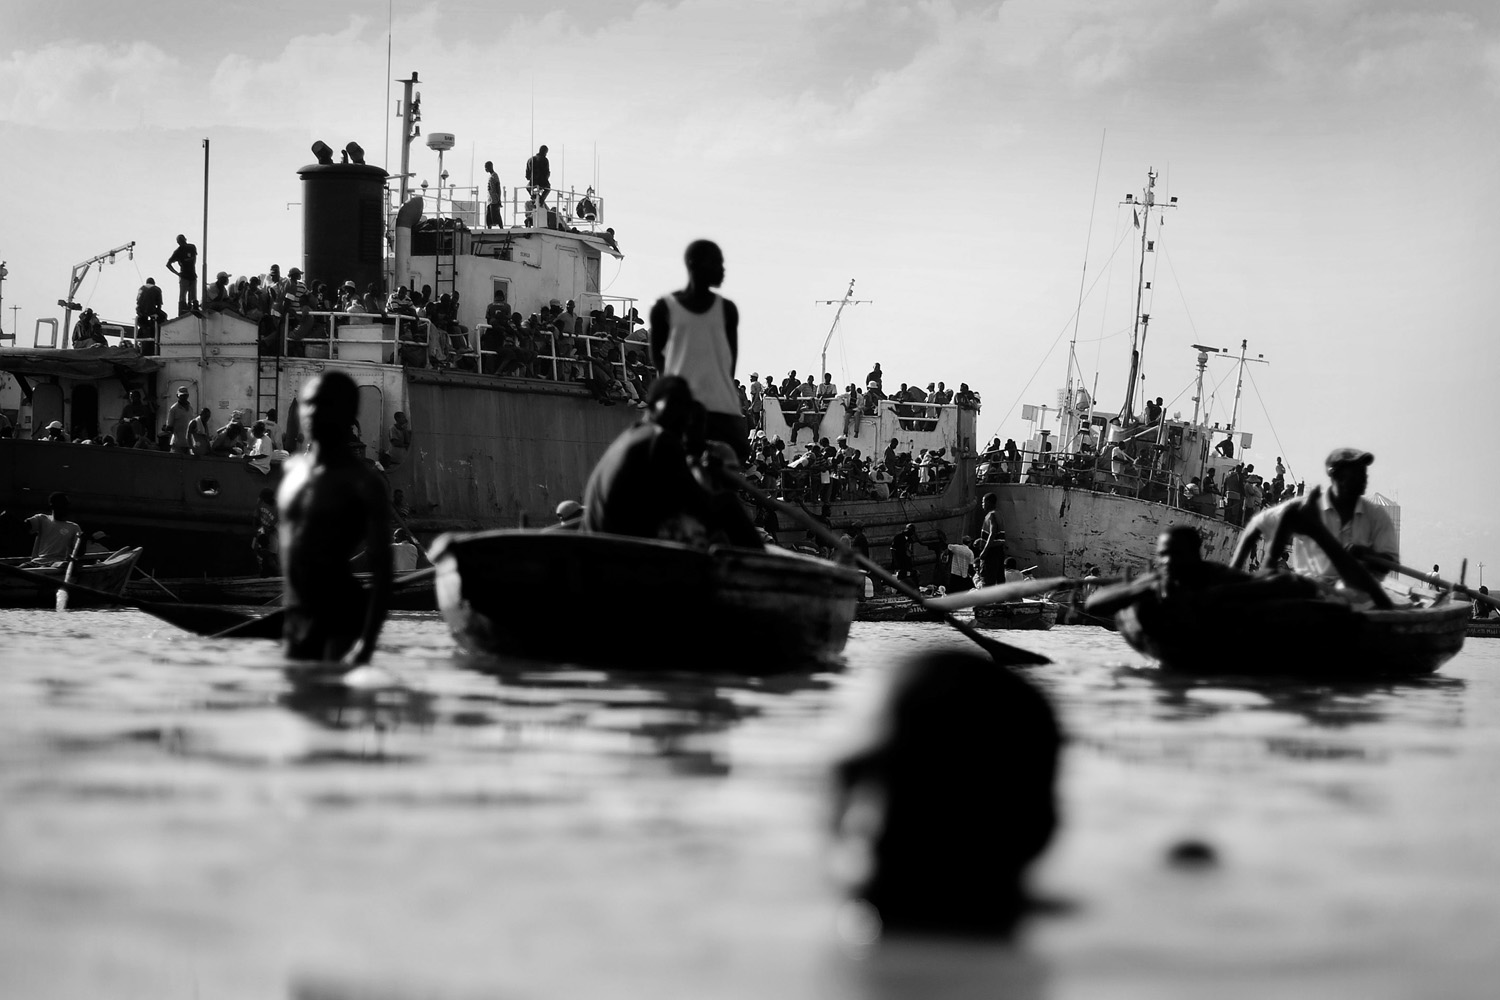 Outside of the main harbor in Port-au-Prince, thousands of Haitians try to flee the country by boat.